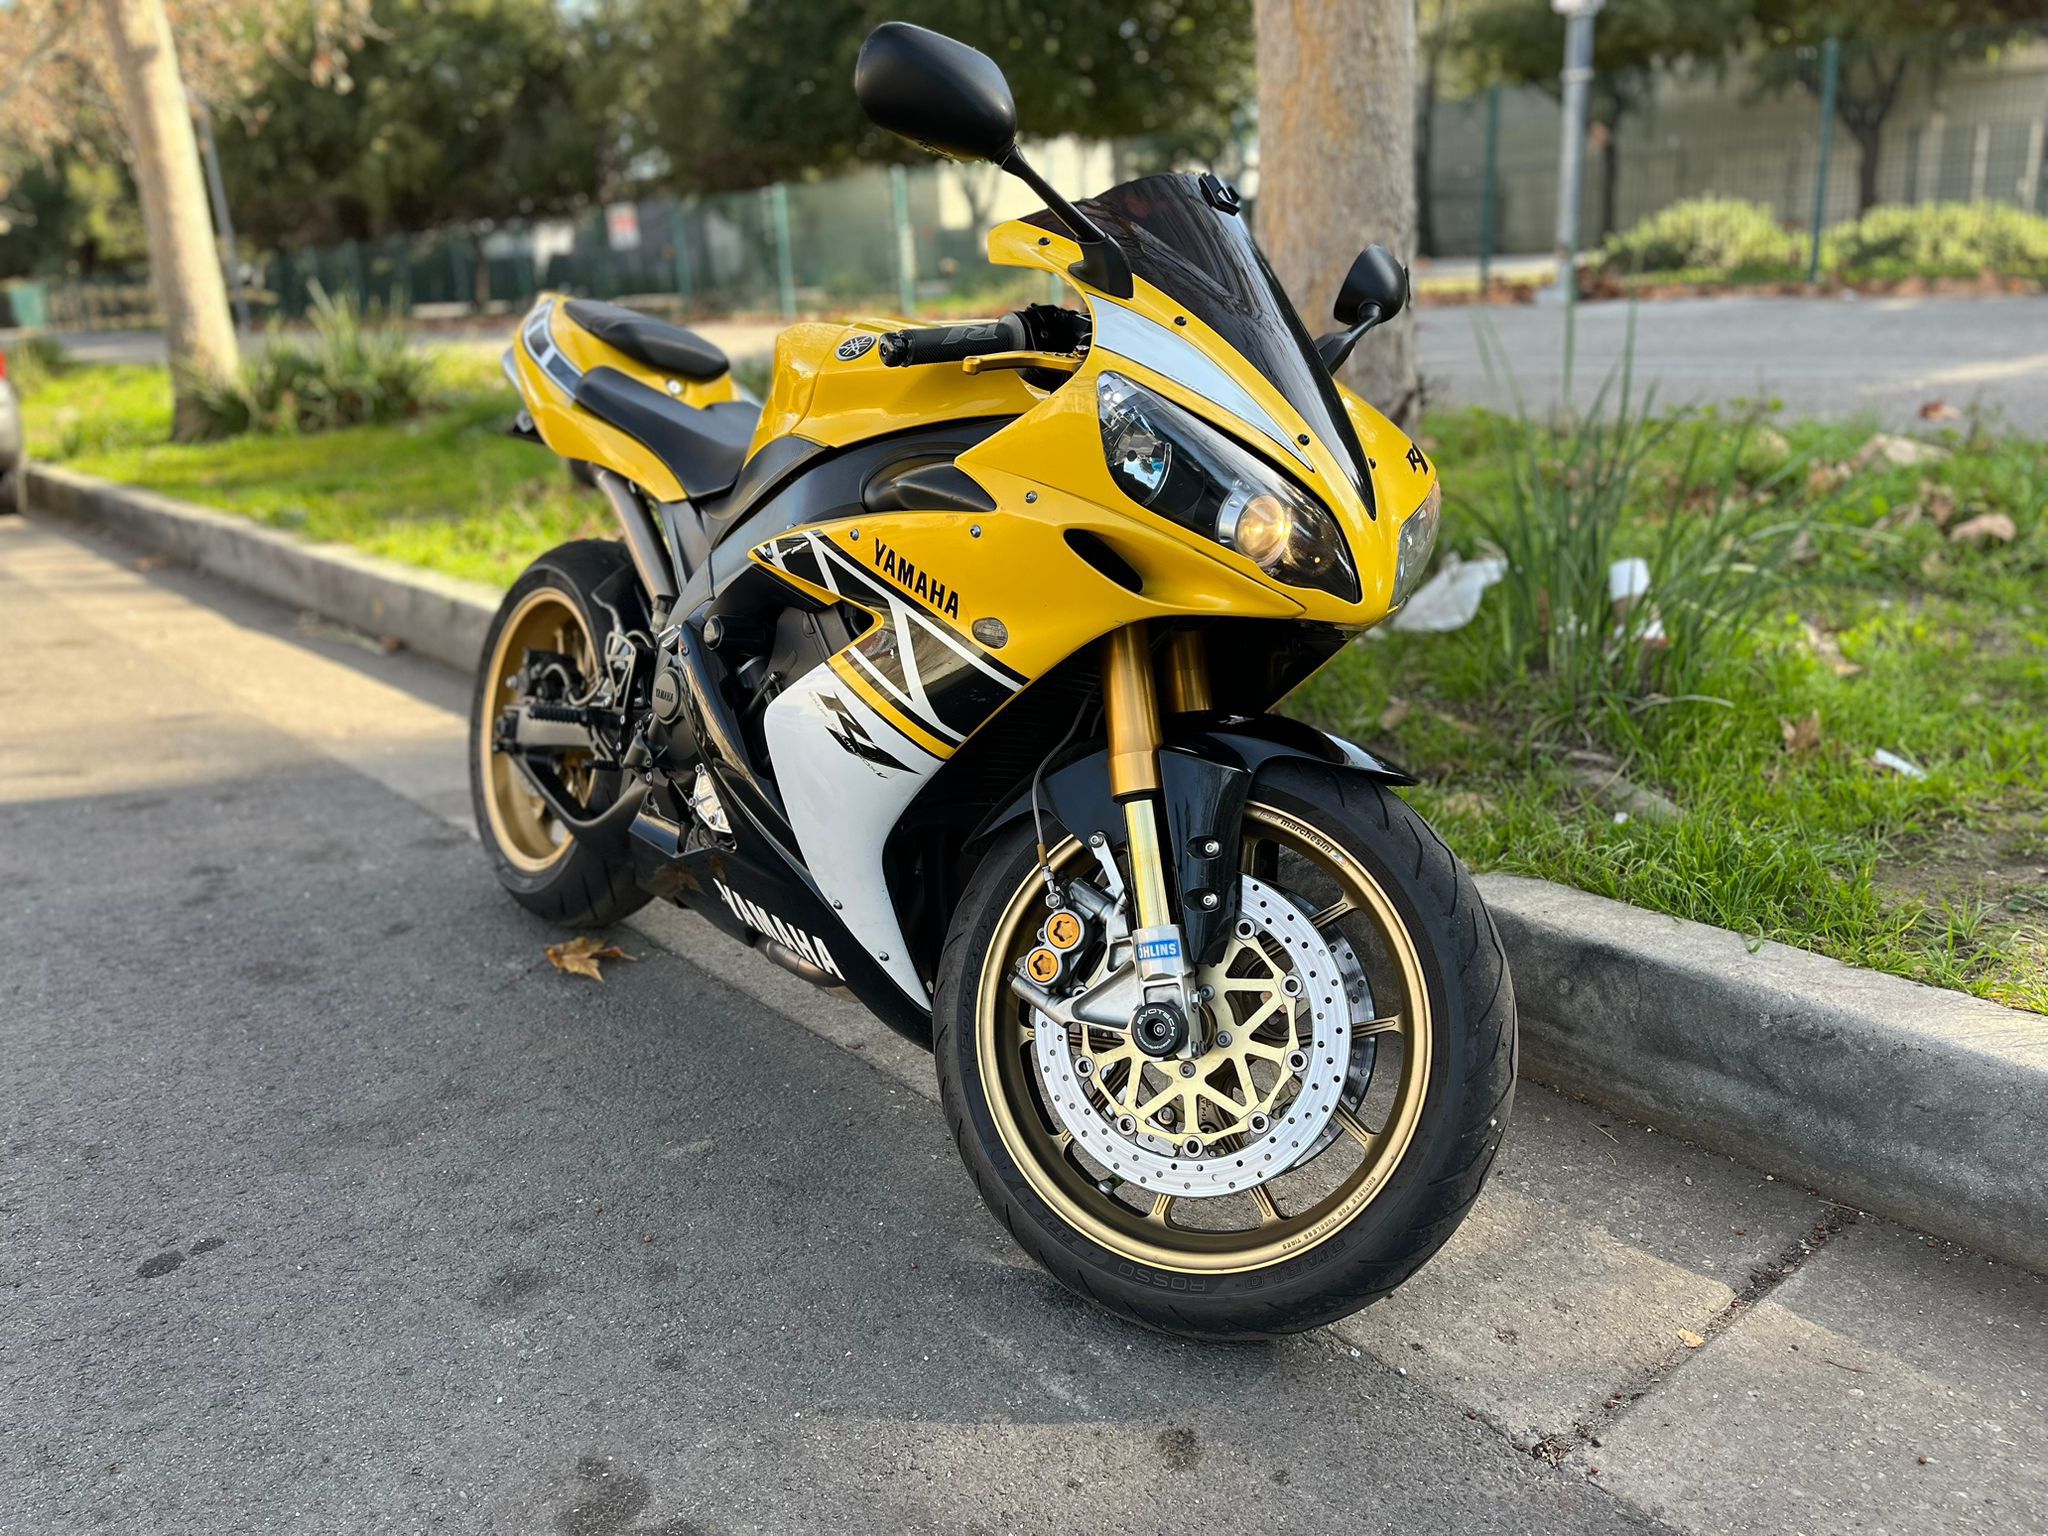 06 YAMAHA R1 LE (LIMITED EDITION) Numbered out of only 500 ever made 50th anniversary. MERCHESINI RIMS & OHLINS SUSPENSION STOCK